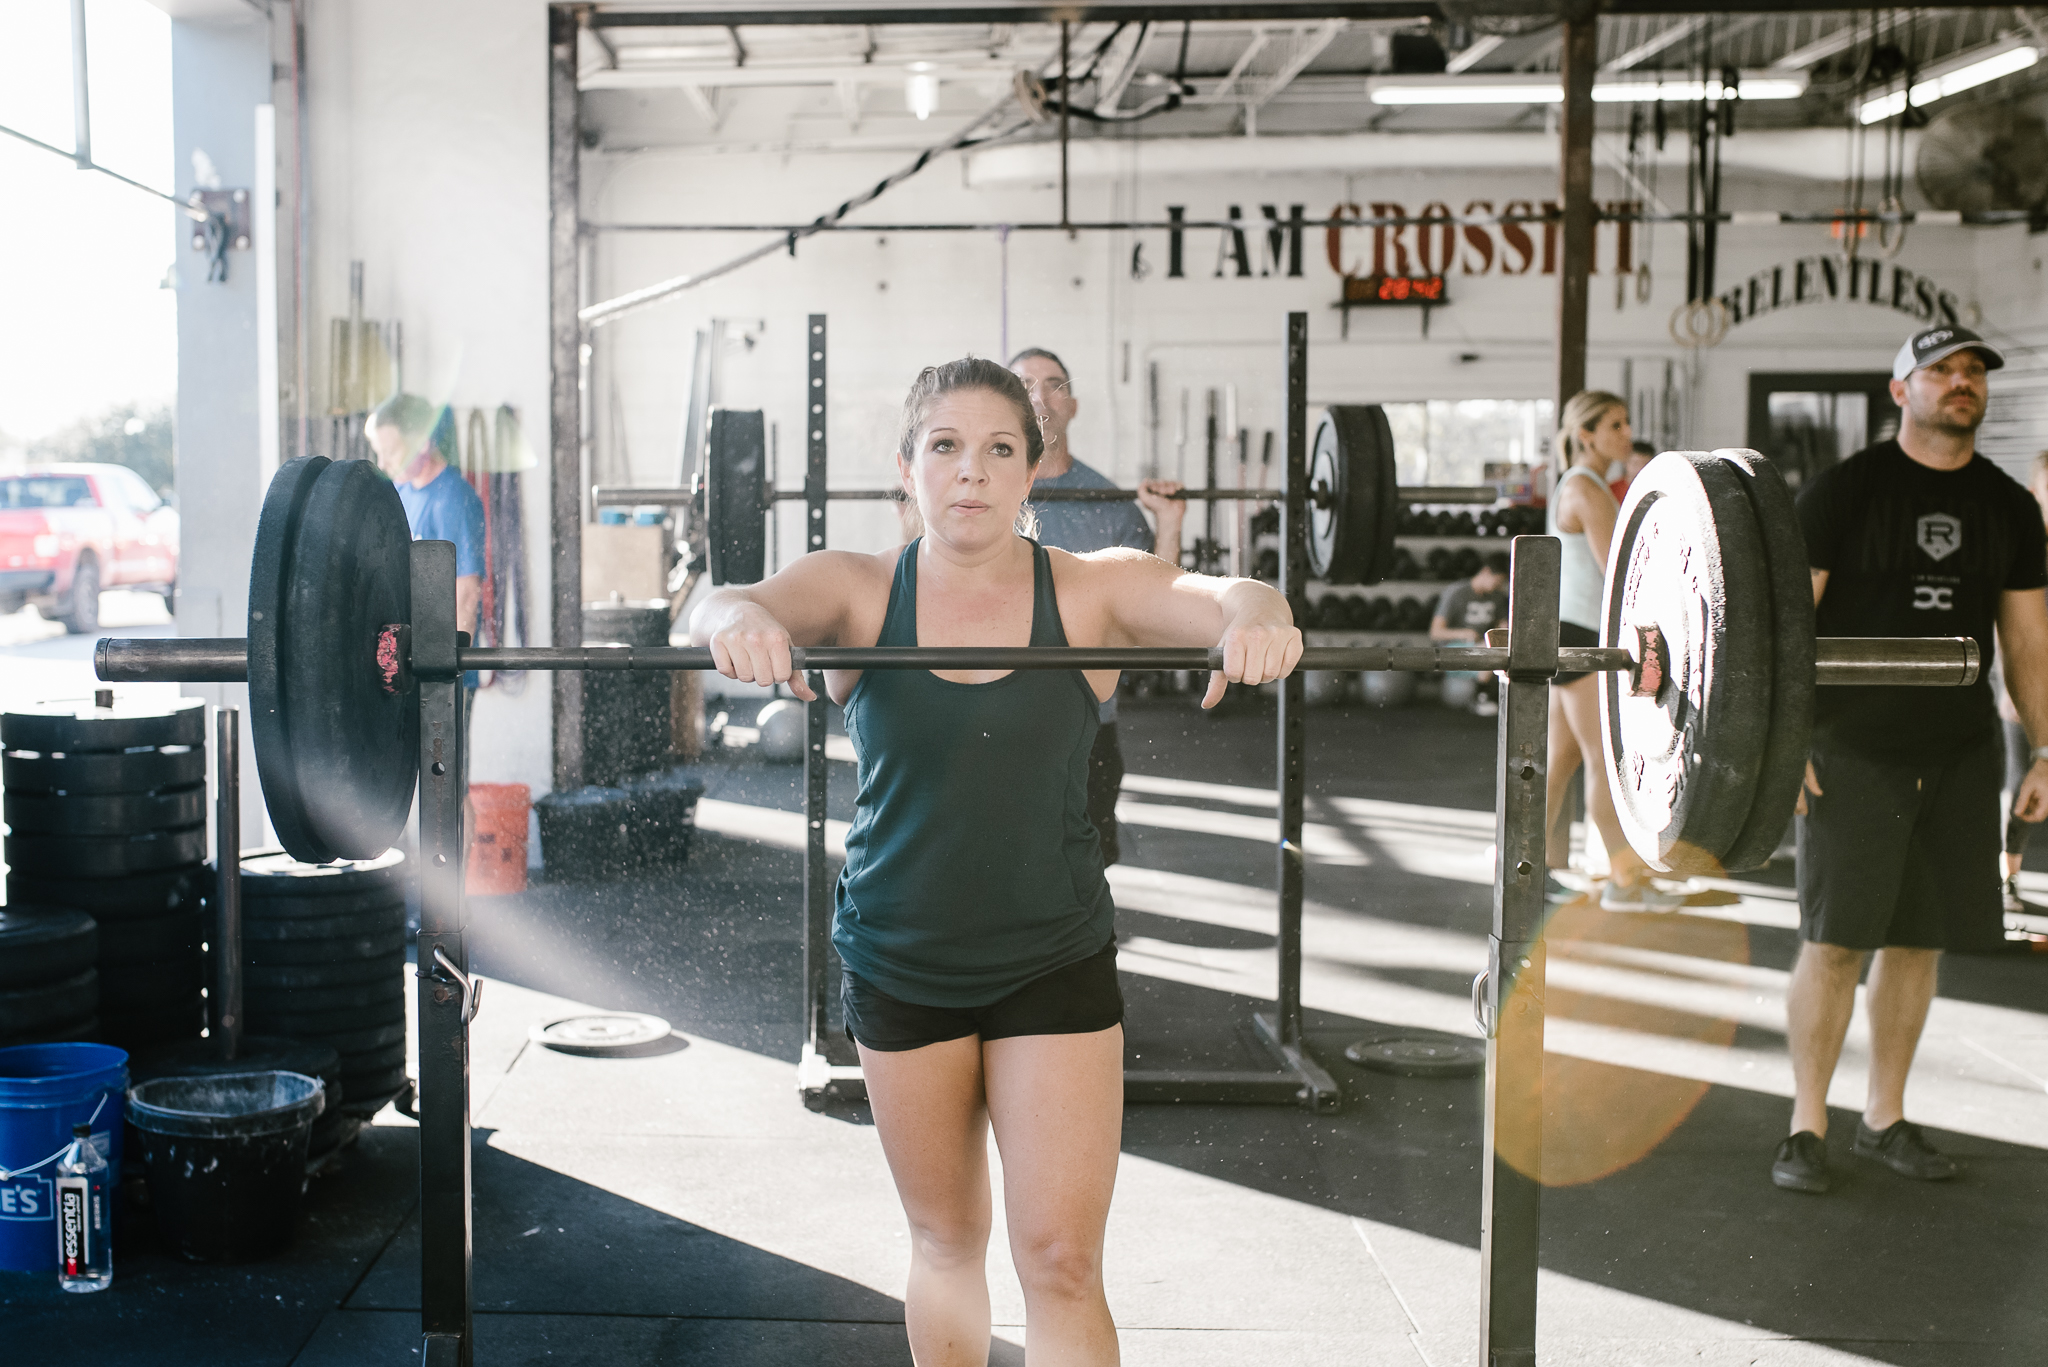 Austin and Round Rock Commercial Photography - Emily Ingalls Photography - Sports and Fitness Photography - CrossFit Central_CrossFit and Weight lifting Photography-11.jpg